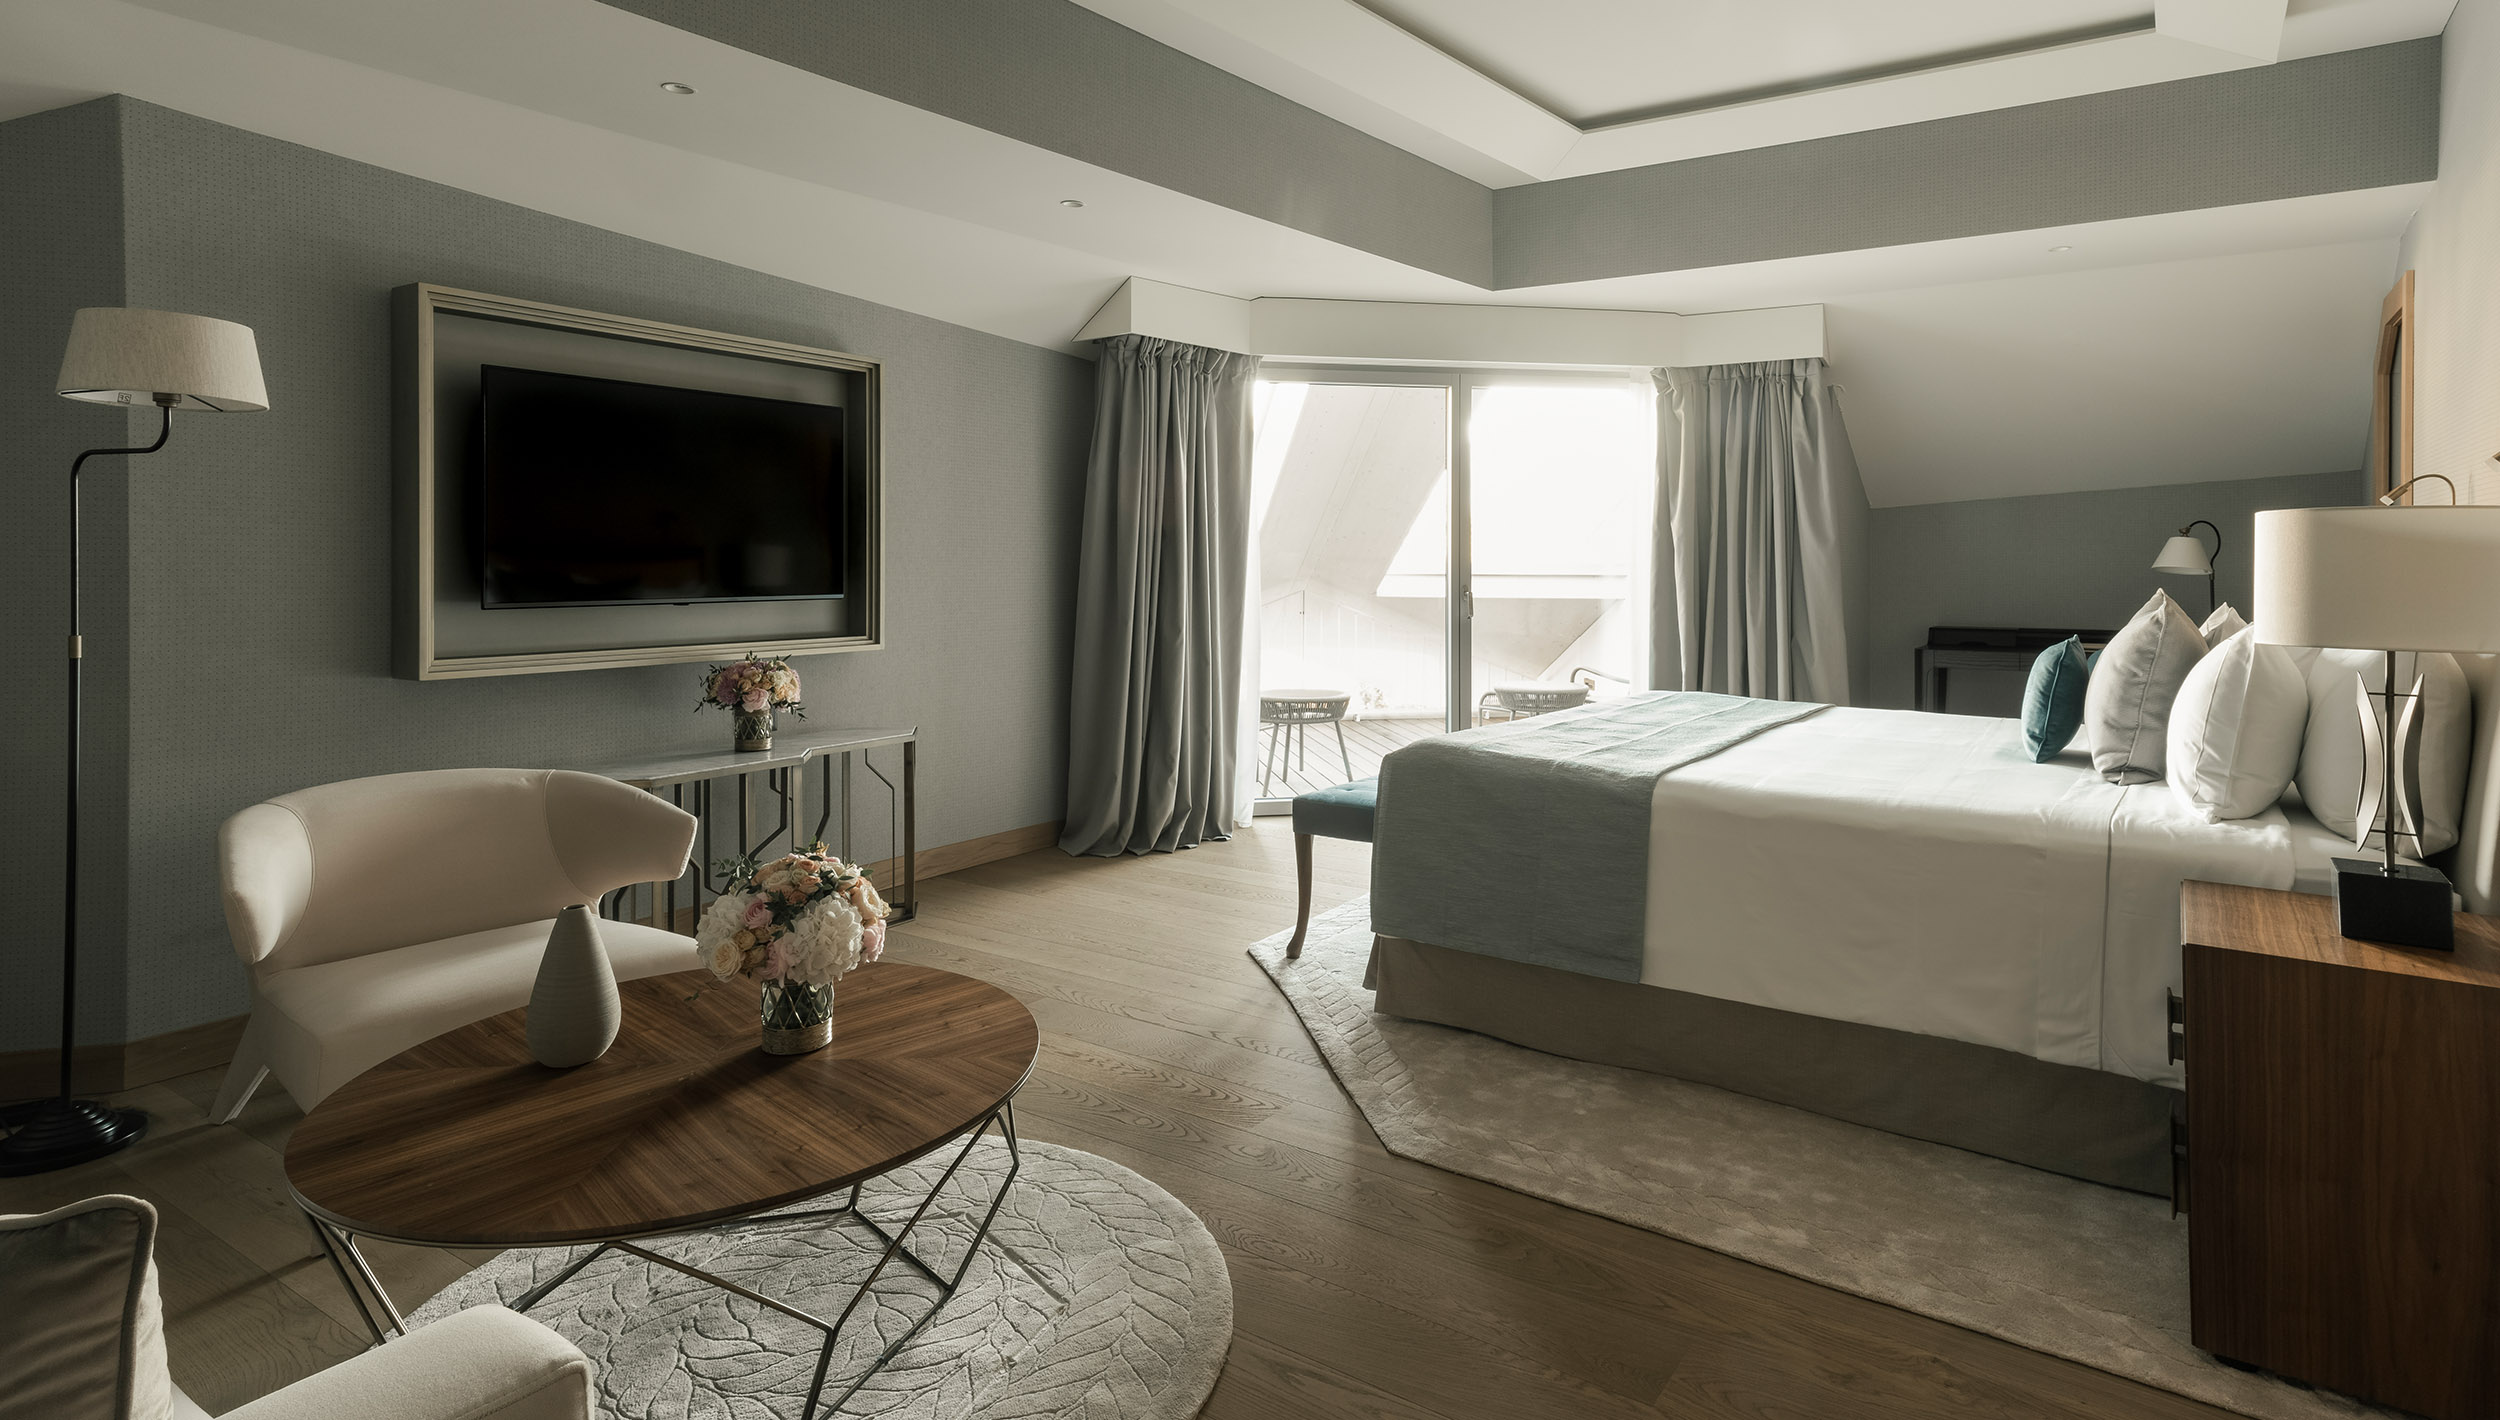 <h4>JUNIOR SUITE</h4><p class="small">With unique designs and layouts, our Junior Suites boast a spacious sitting area, walk-in closet and balconies with magnificent views of Lake Lucerne.</p>